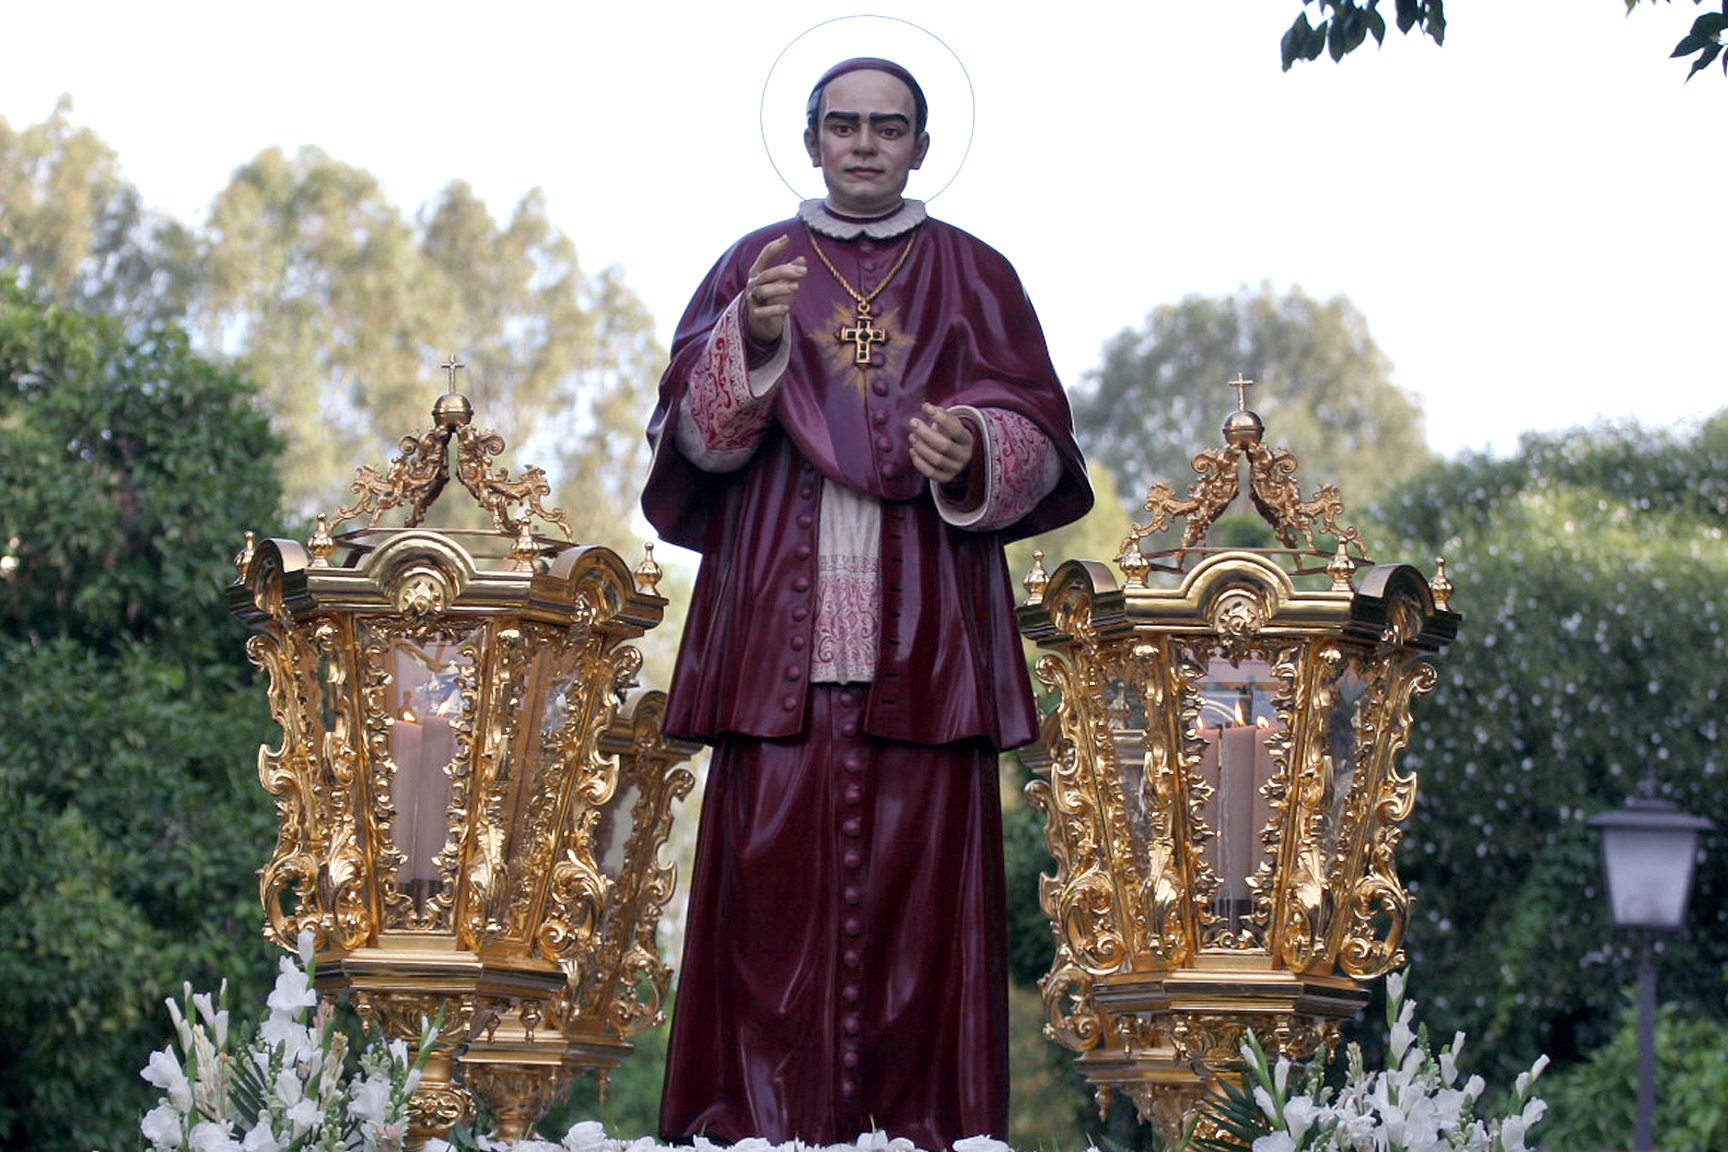 Statue of Saint Anthony Mary Claret - Procession of the Parish and the College Claret of Sevilla.